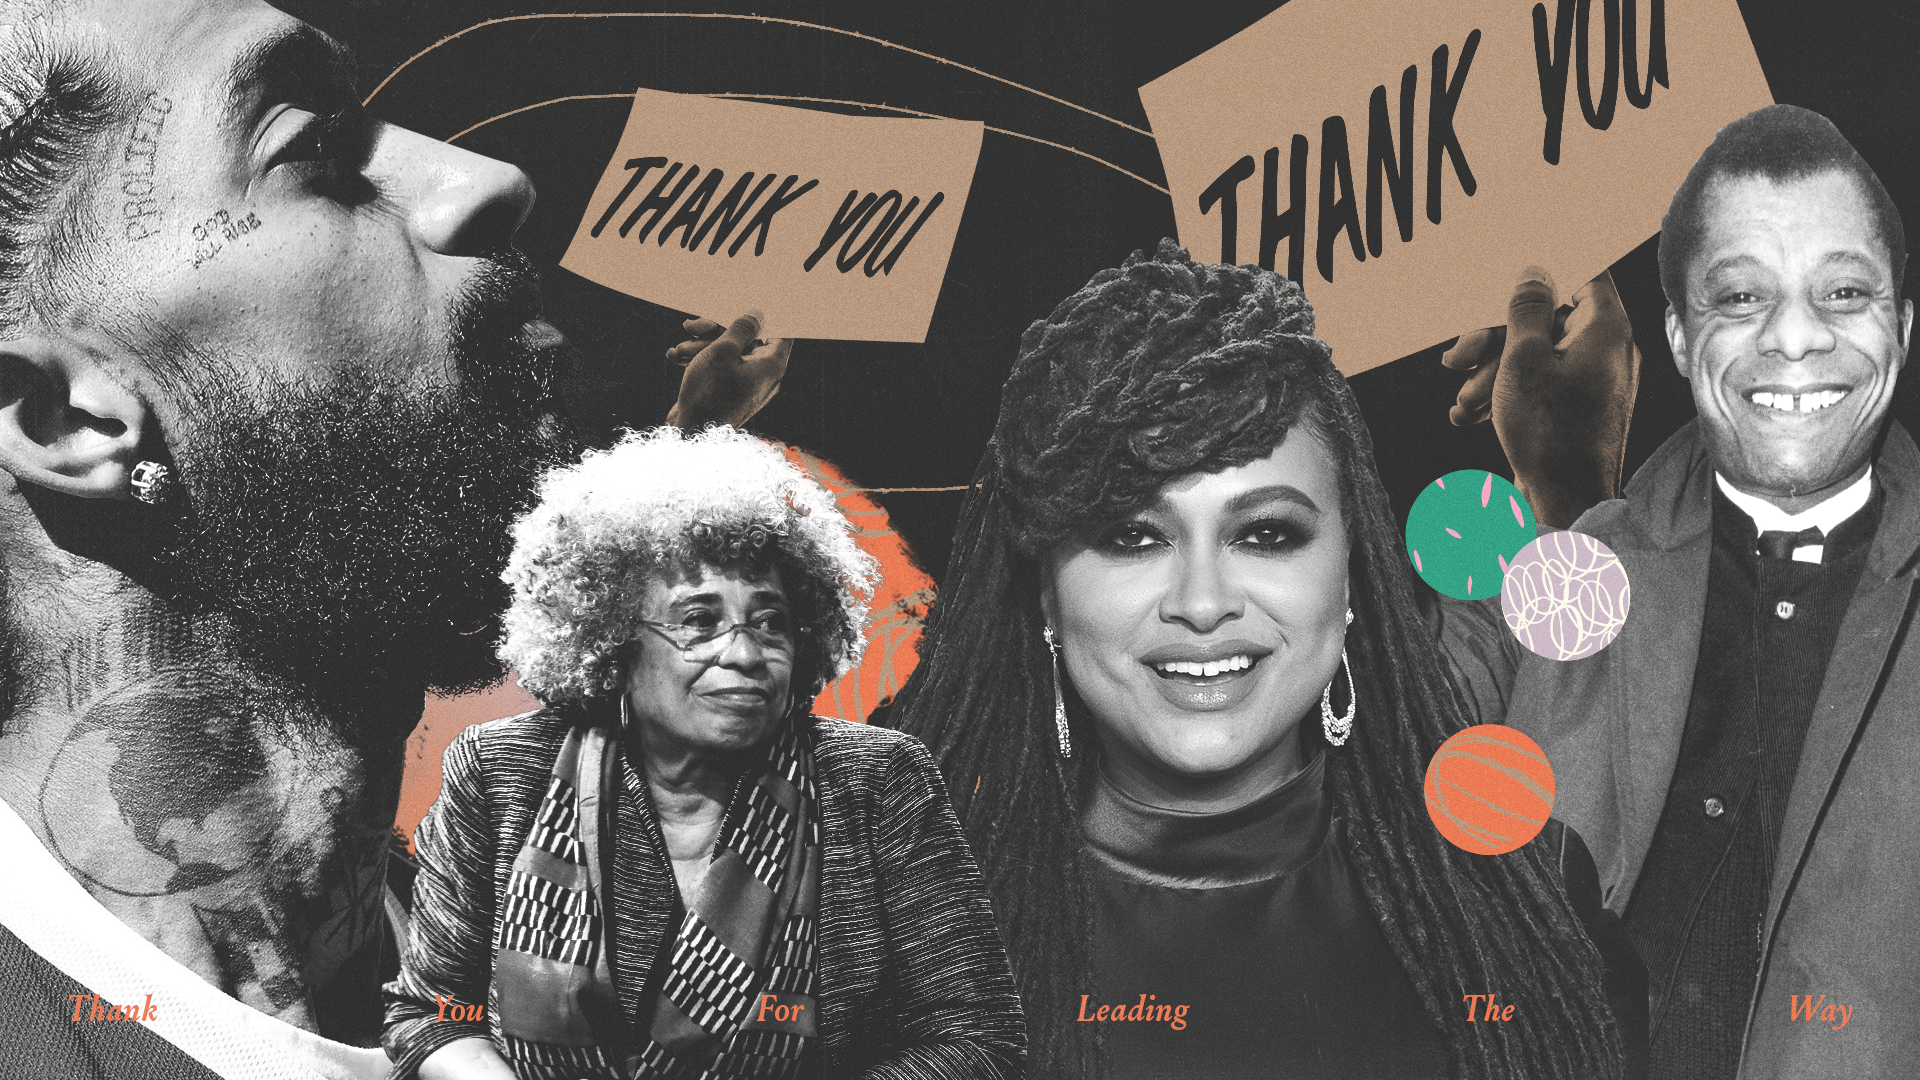 It's been an amazing 2021, and we have you to thank for it! From